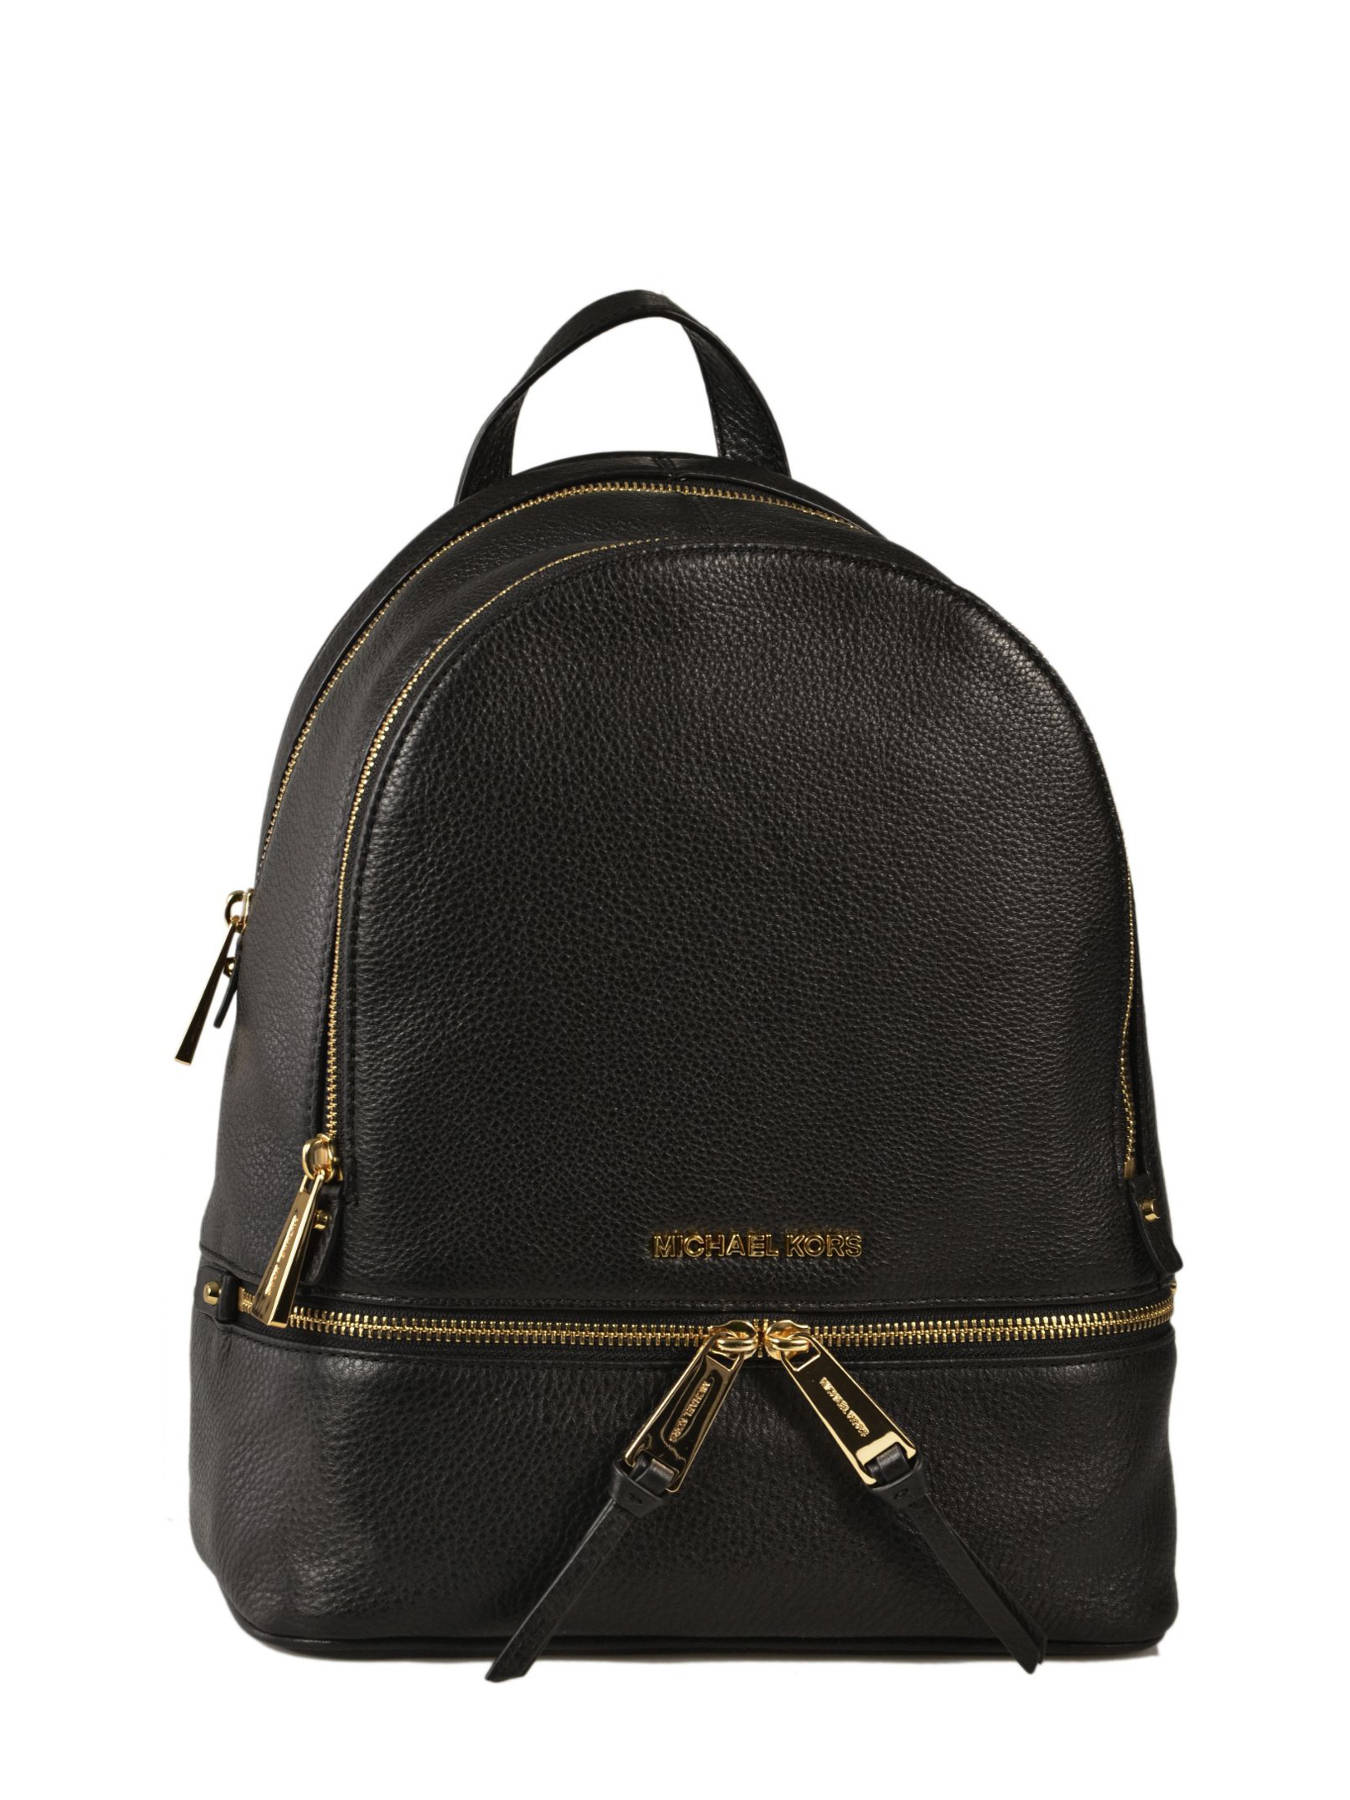 Michael Kors Backpack  - free shipping available